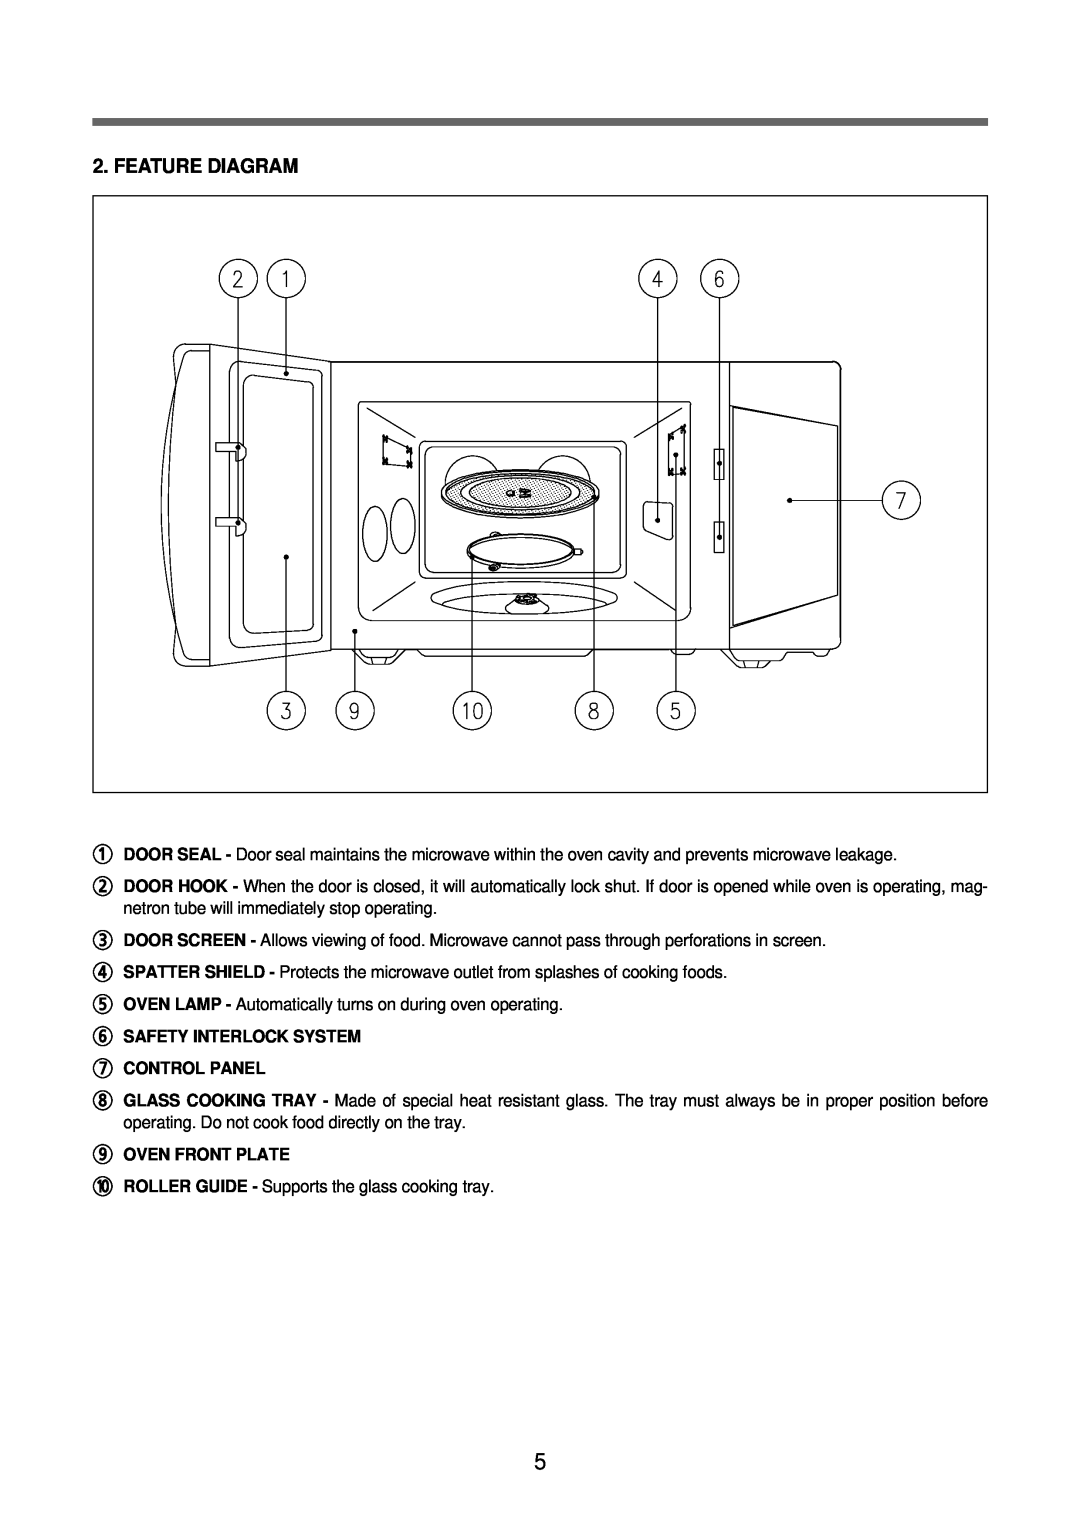 Daewoo KOR-6Q2B5S service manual Feature Diagram, SAFETY INTERLOCK SYSTEM 7 CONTROL PANEL, Oven Front Plate 